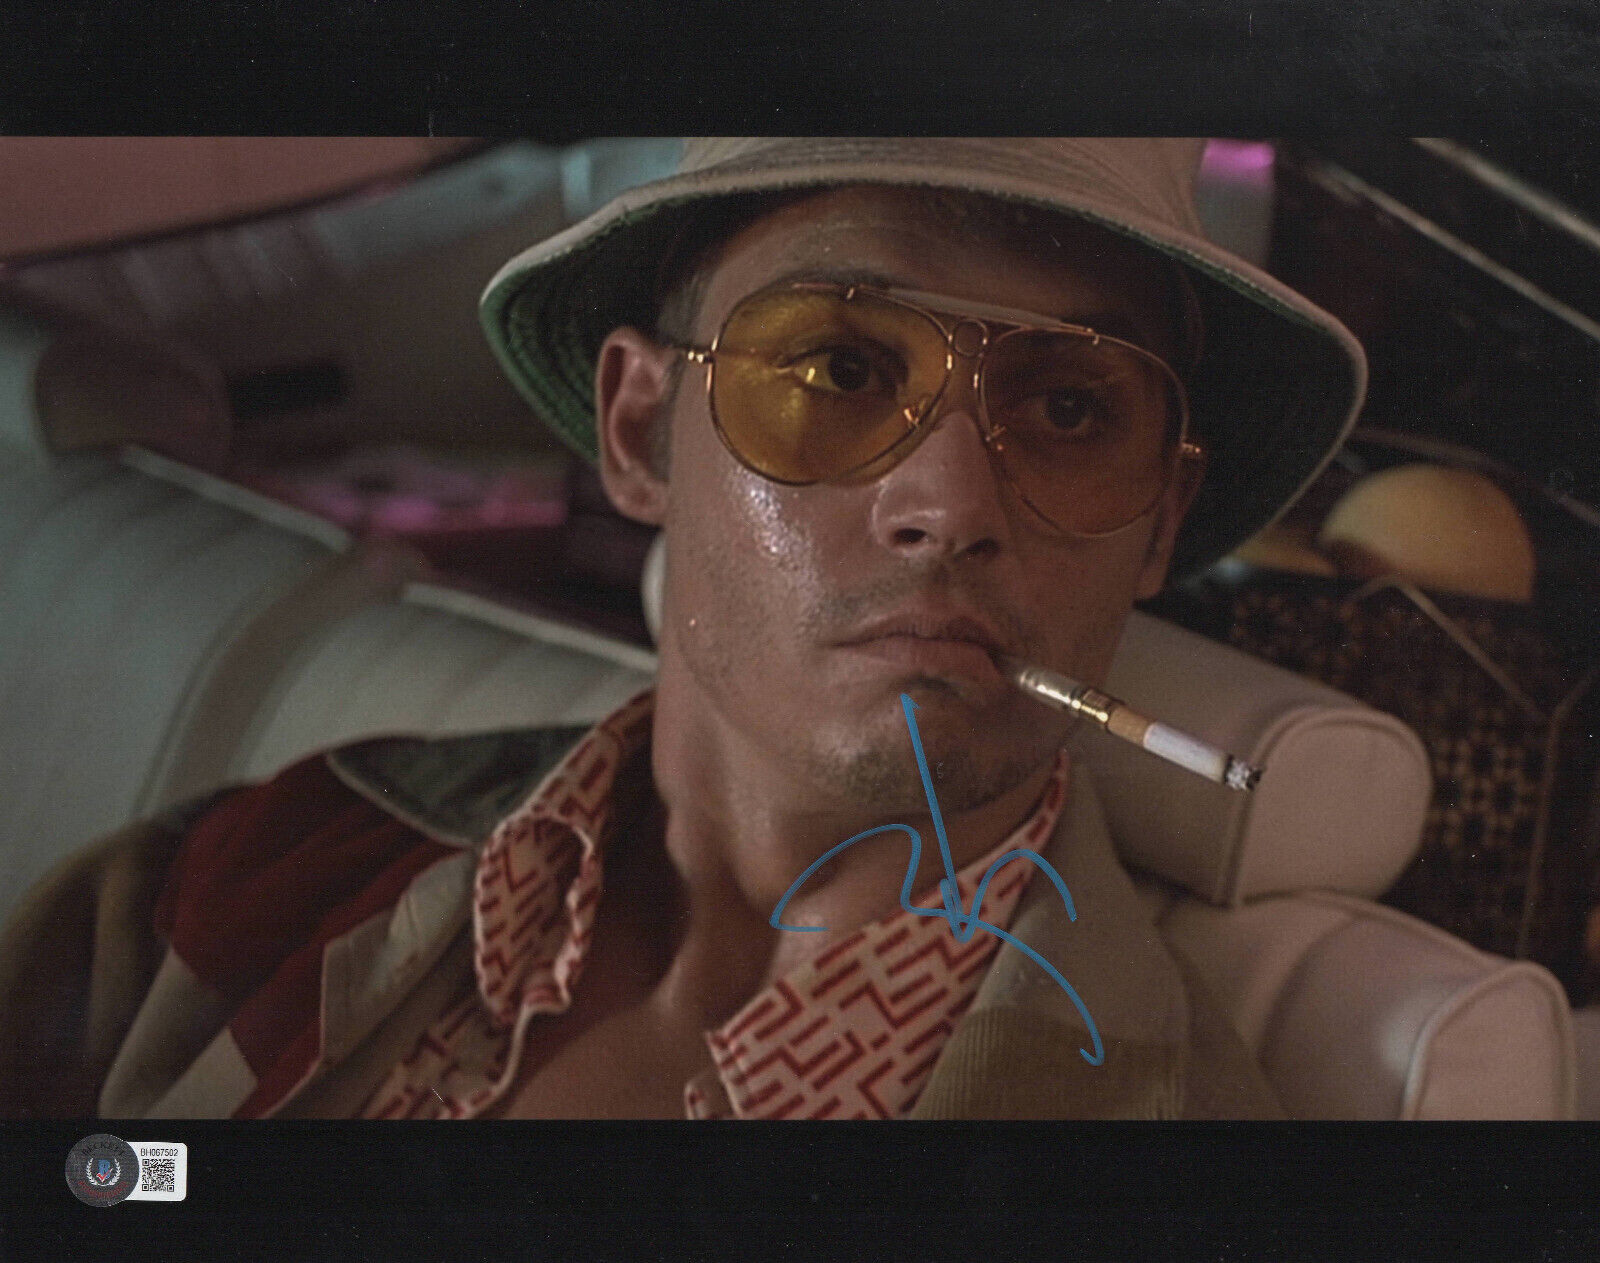 JOHNNY DEPP SIGNED FEAR AND LOATHING IN LAS VEGAS 11X14 PHOTO AUTOGRAPH BECKETT